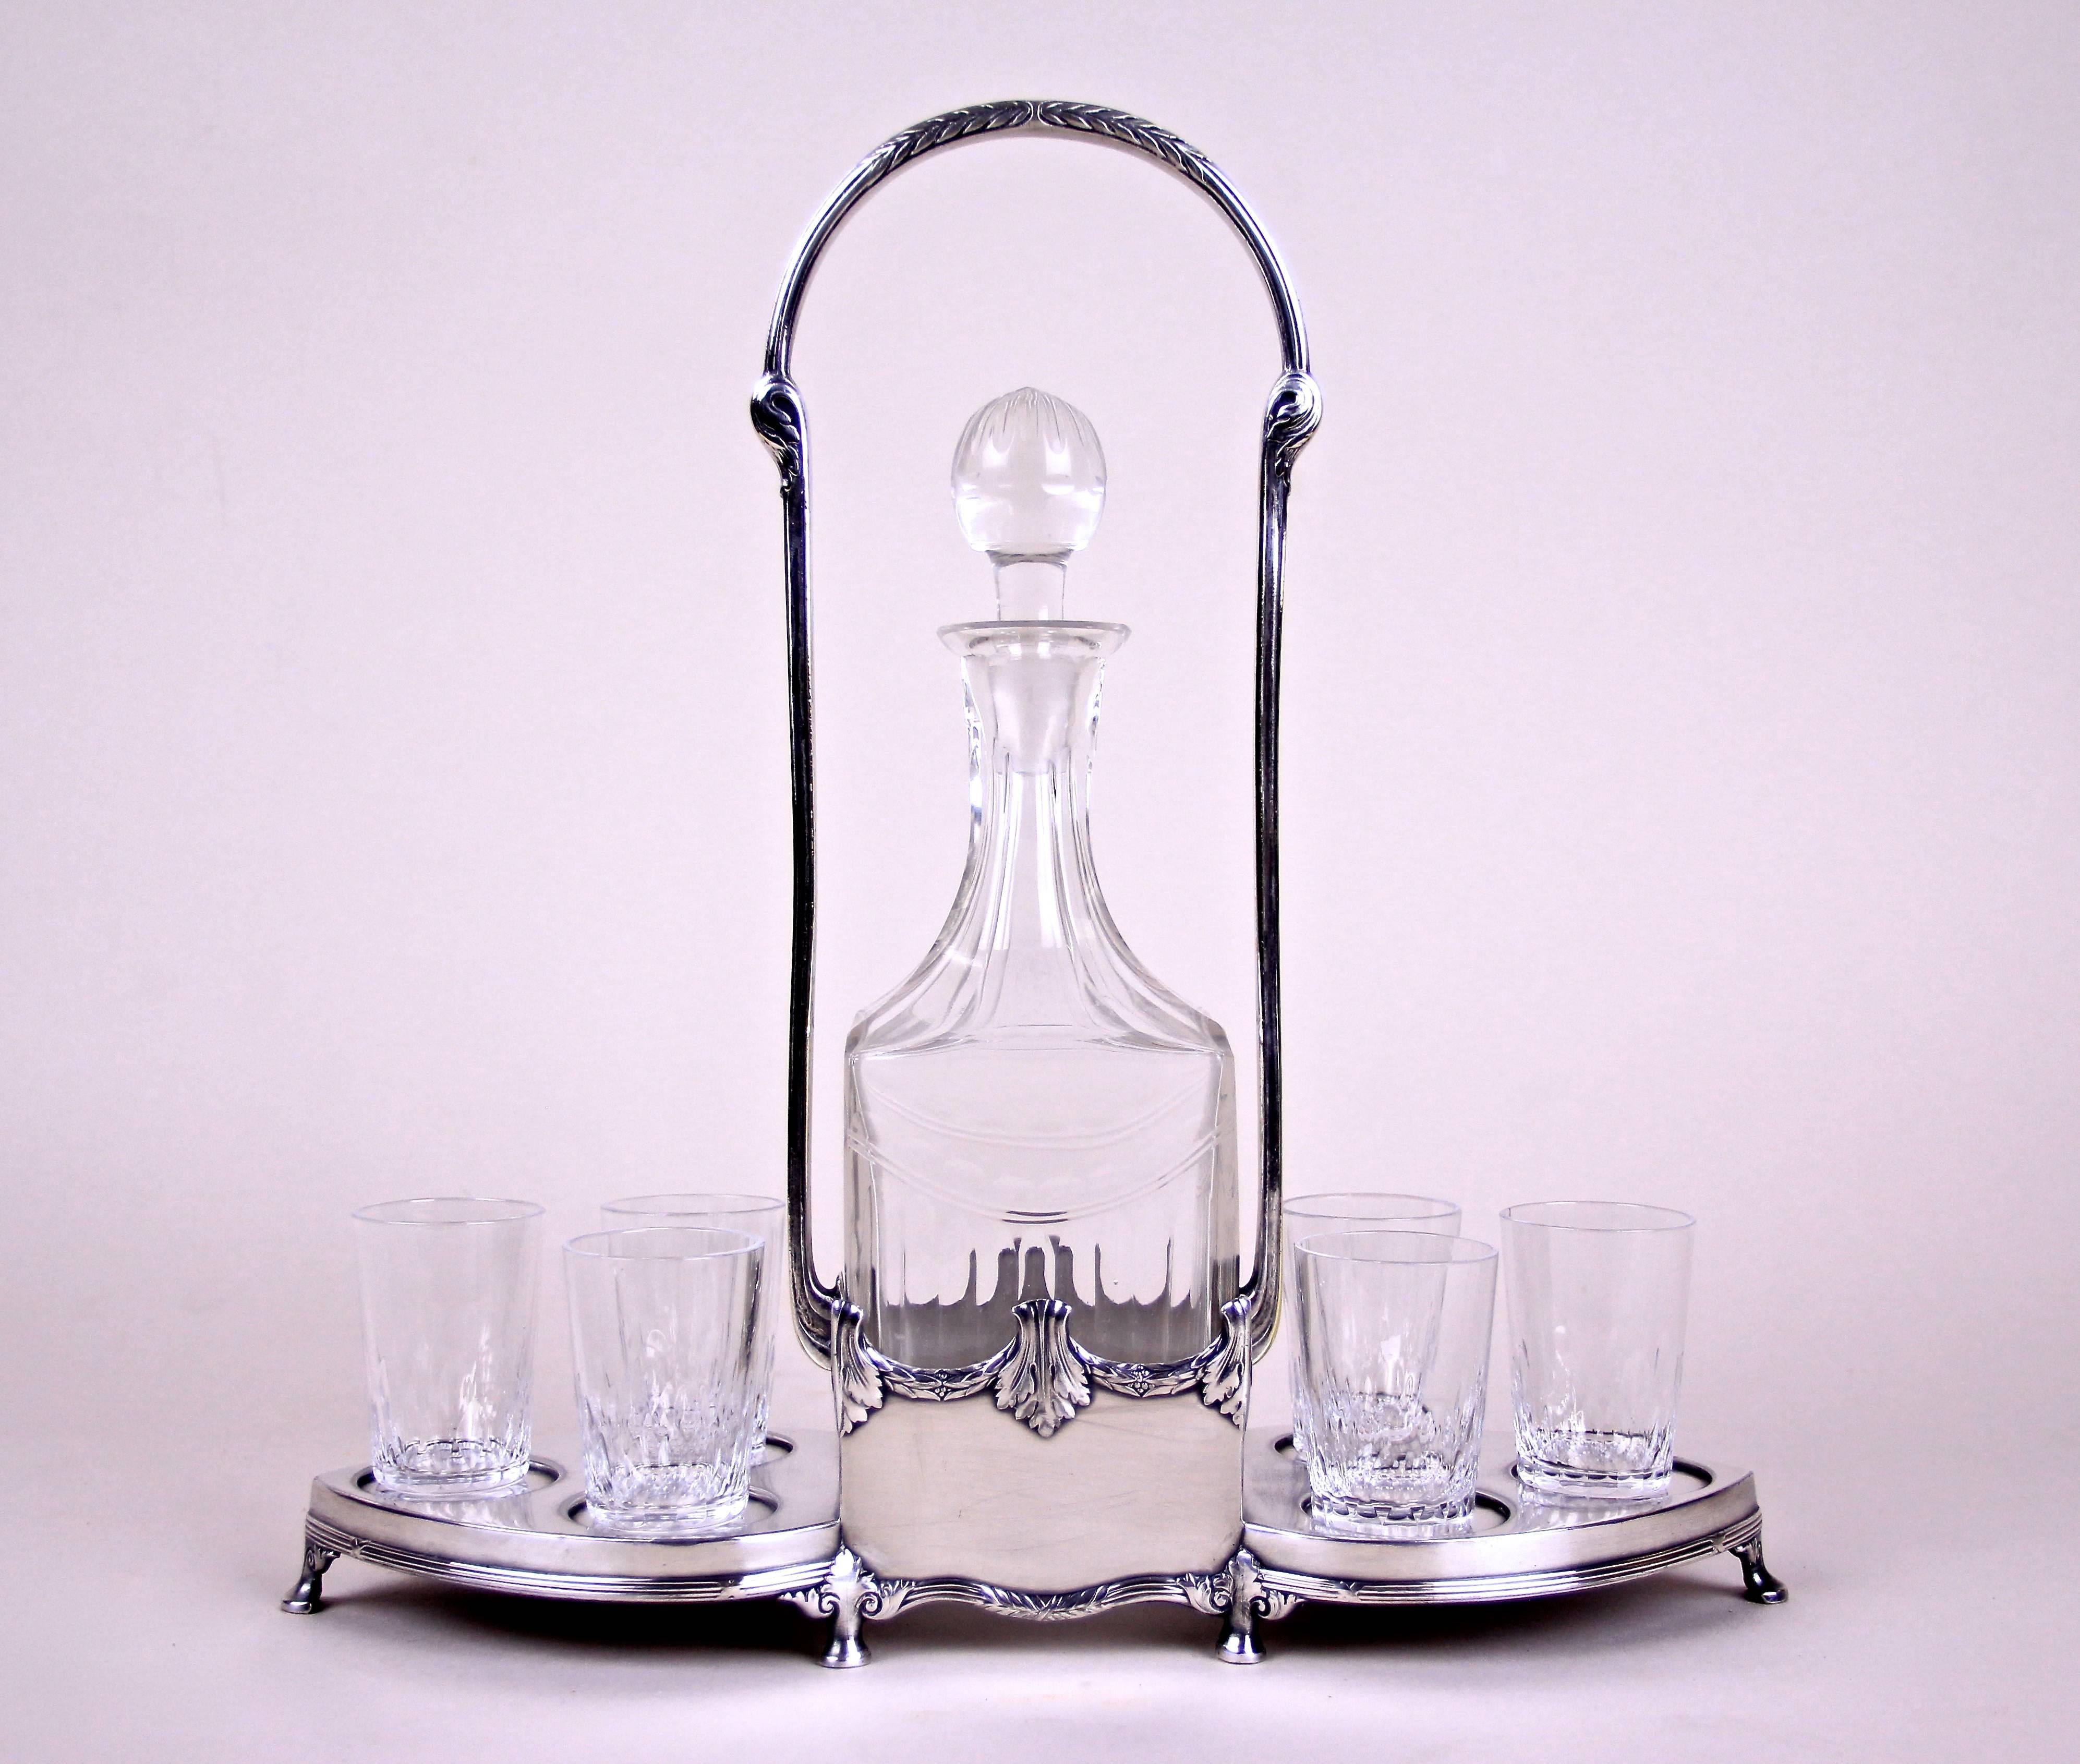 Exclusive Art Nouveau liquor set by WMF from Germany, circa 1910. This amazing set consists of six beautiful cut glasses and a quadrangular glass bottle. The whole glassware is arranged on a beautiful designed silvered metal stand with typical Art